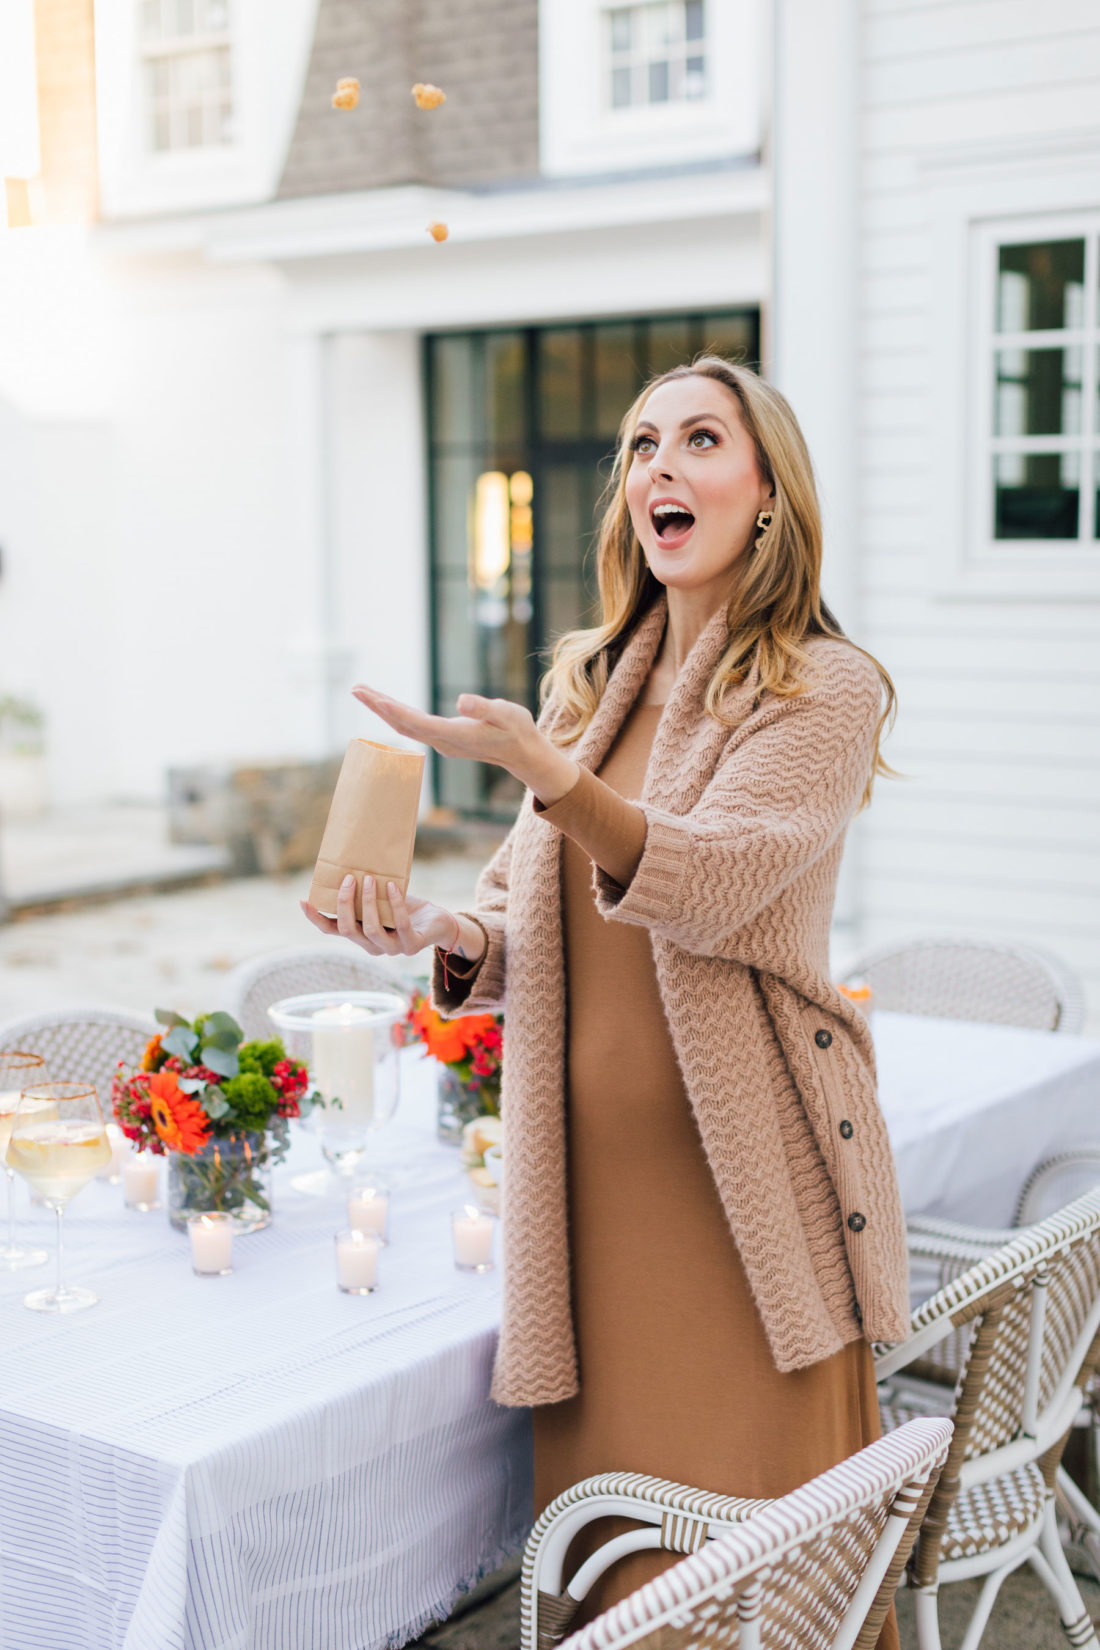 Eva Amurri throws popcorn into her mouth before an outdoor movie night on the back patio of her Connecticut home